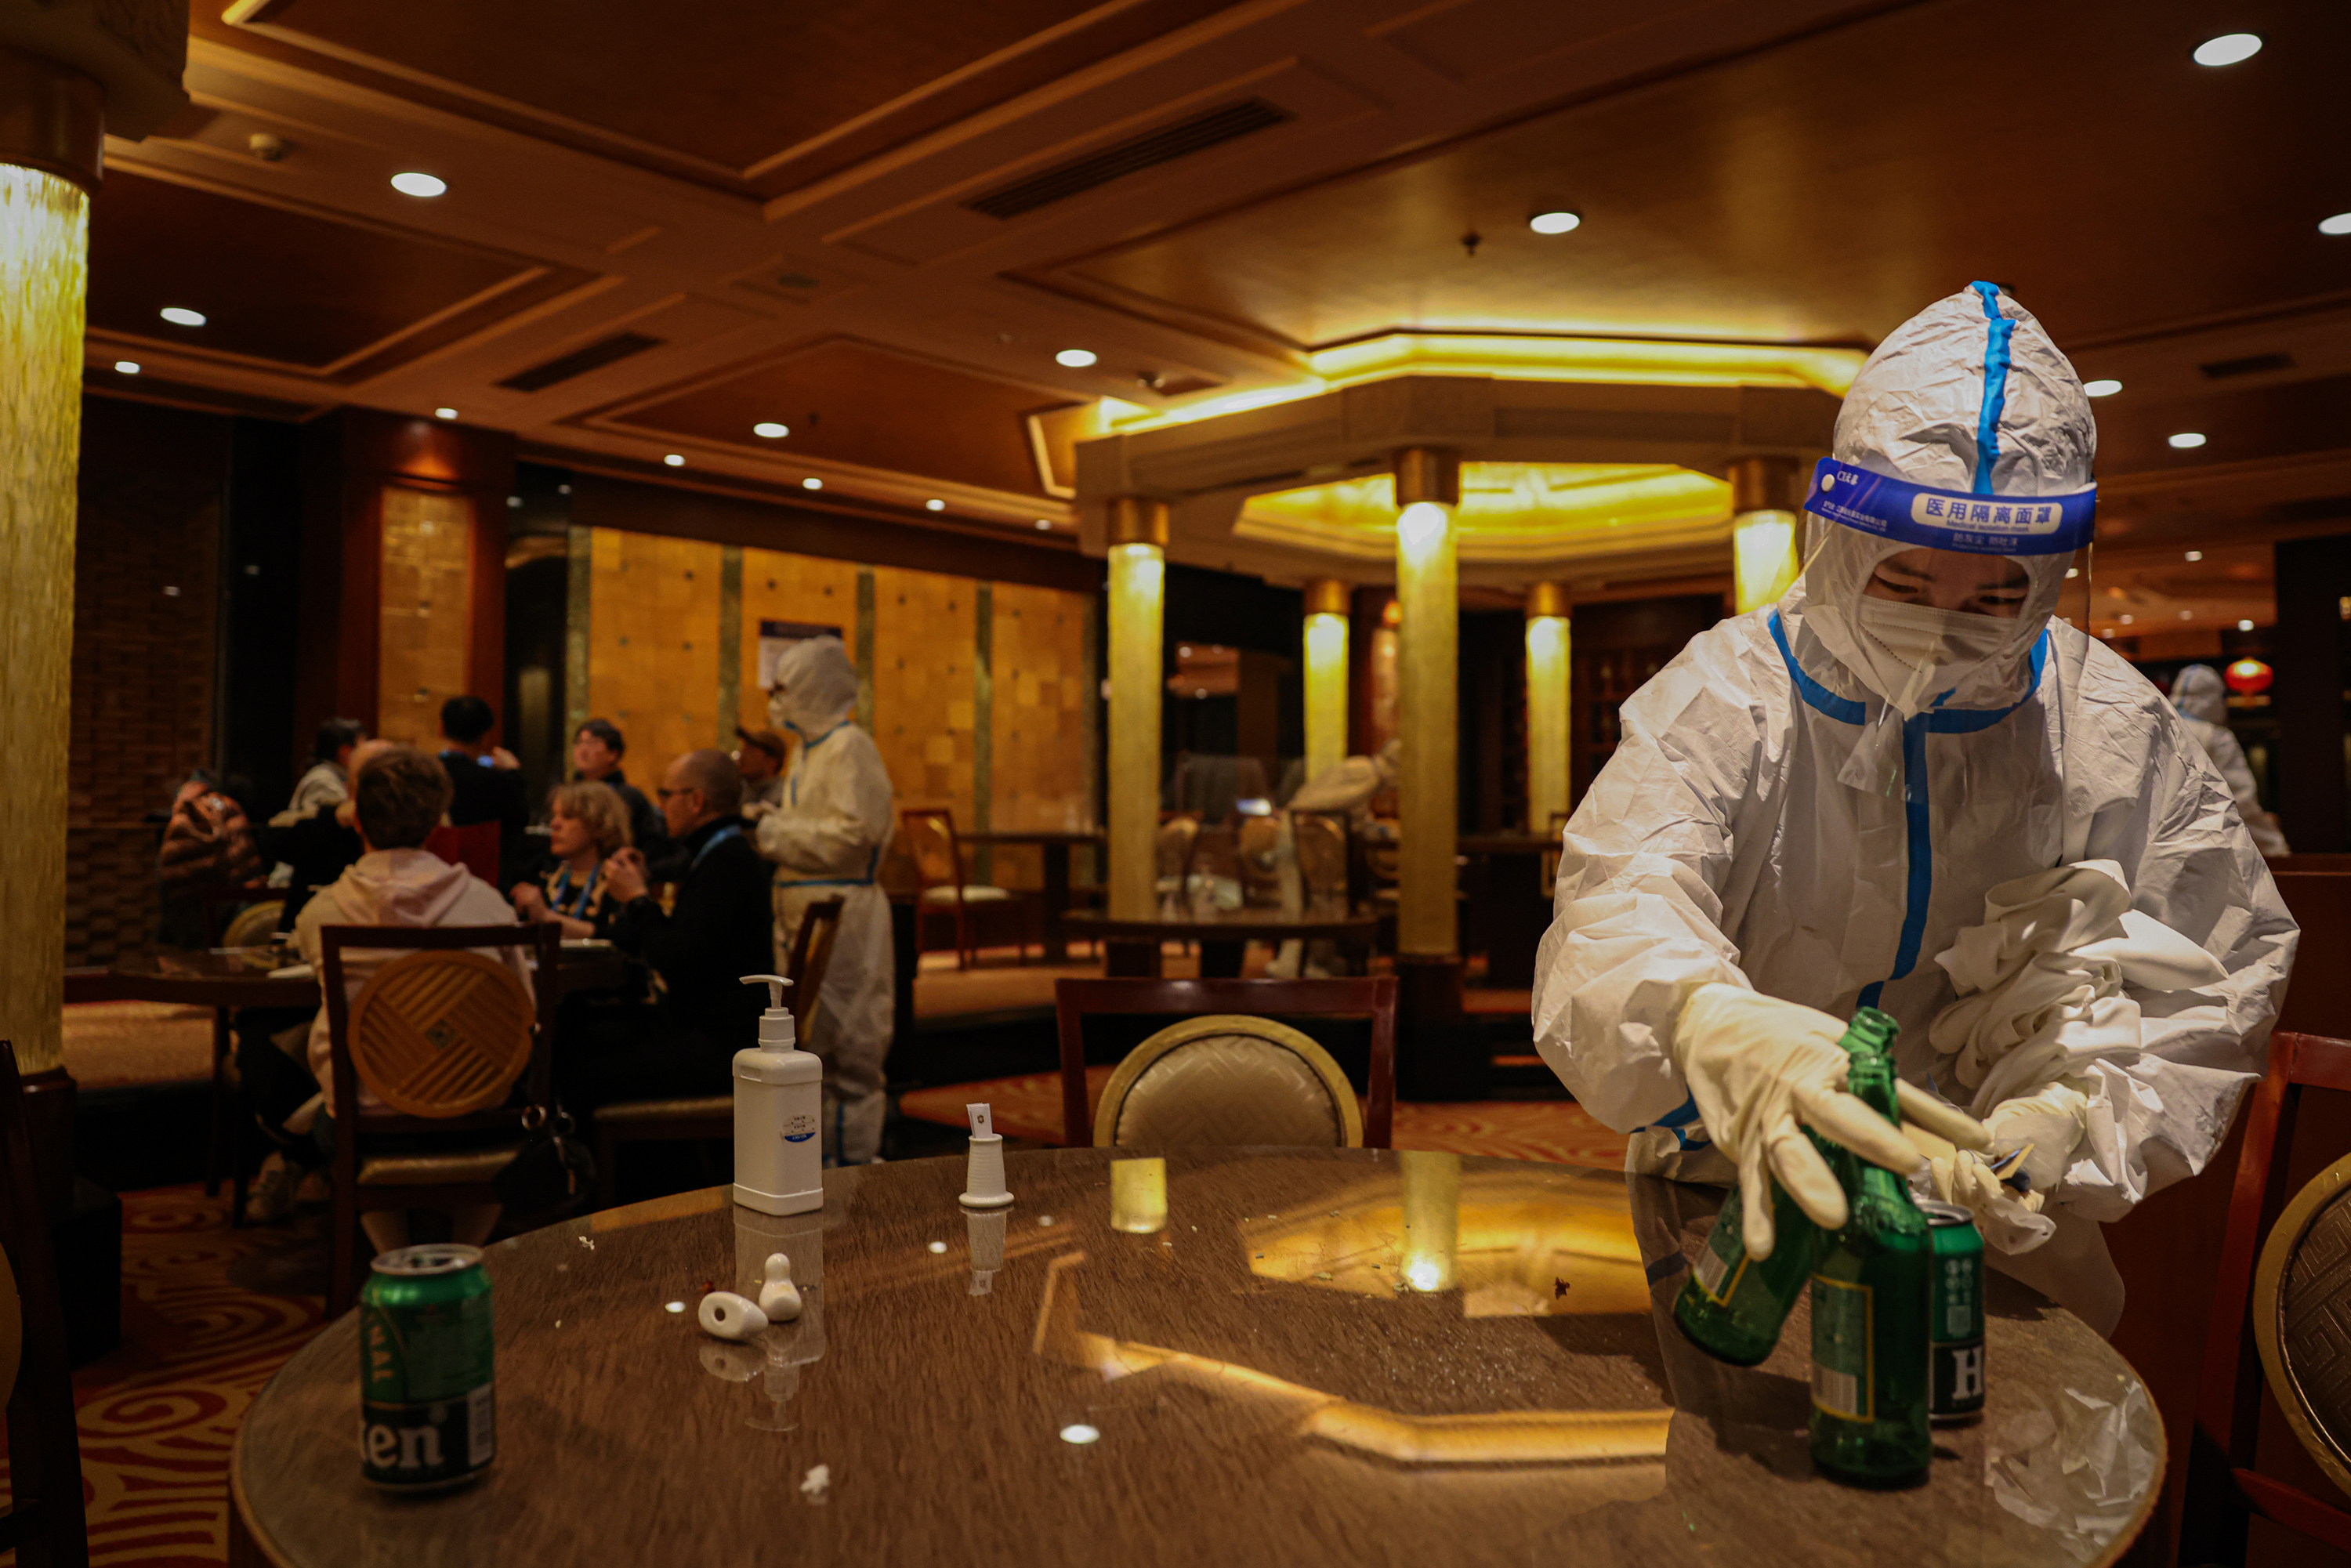 Workers in hazmat suits work in a hotel restaurant, which is part of the Beijing 2022 Winter Olympics closed-loop system on February 10.